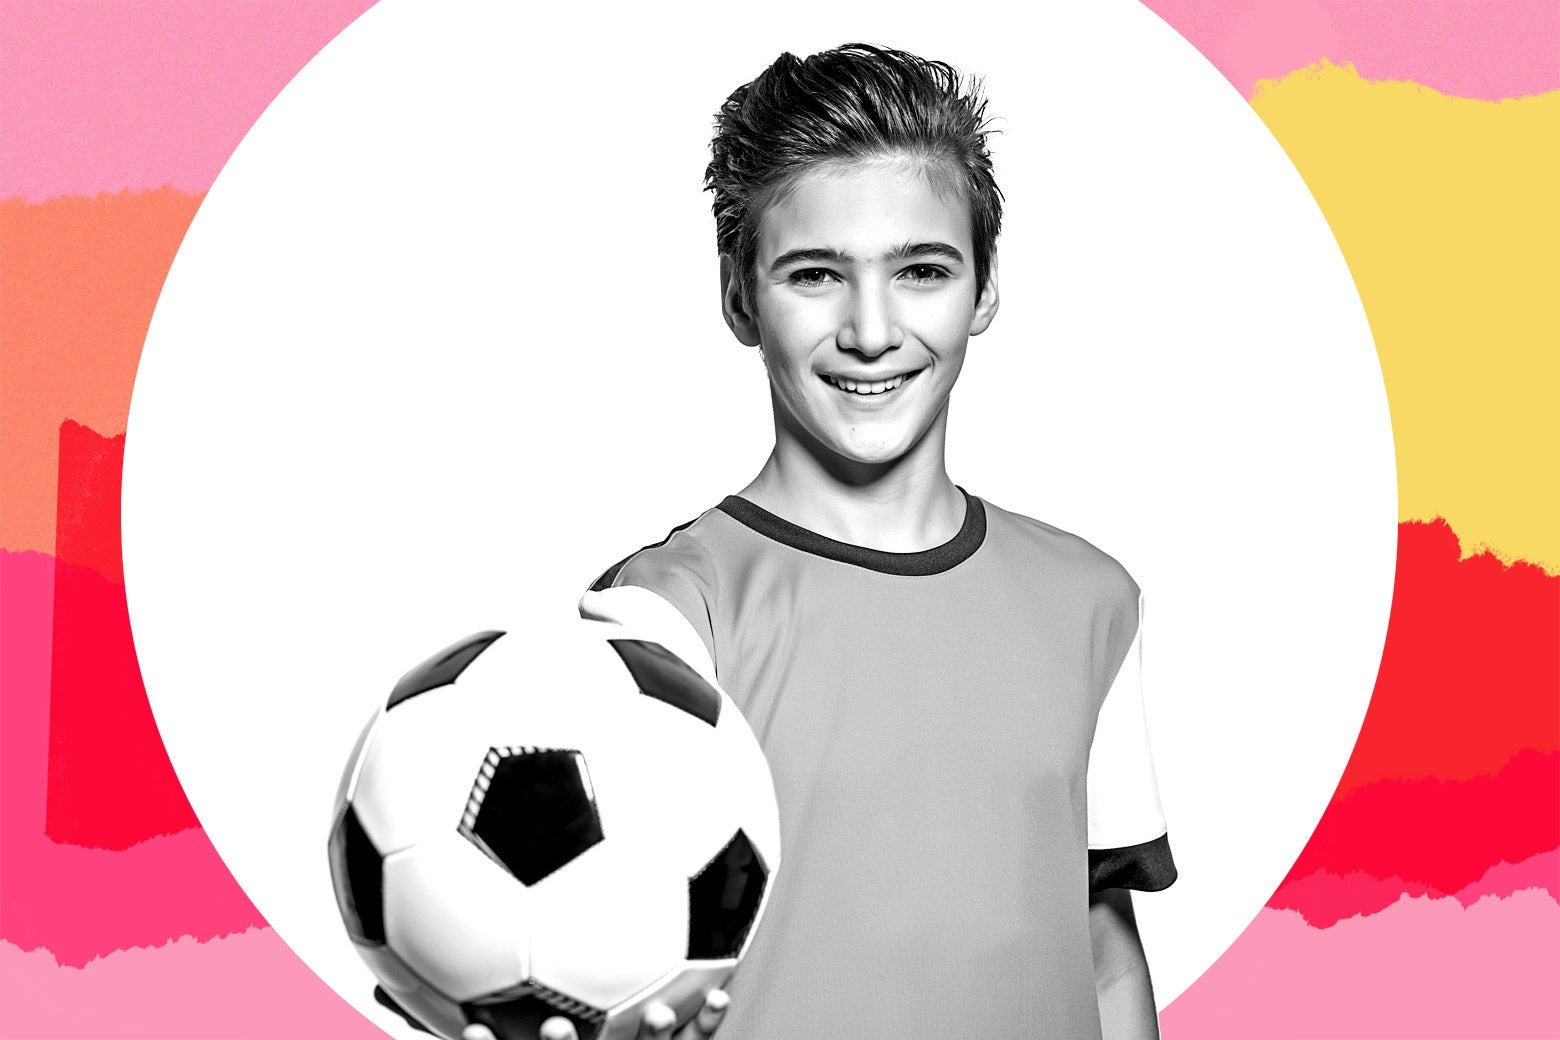 A young boy in a soccer uniform holding out a soccer ball.